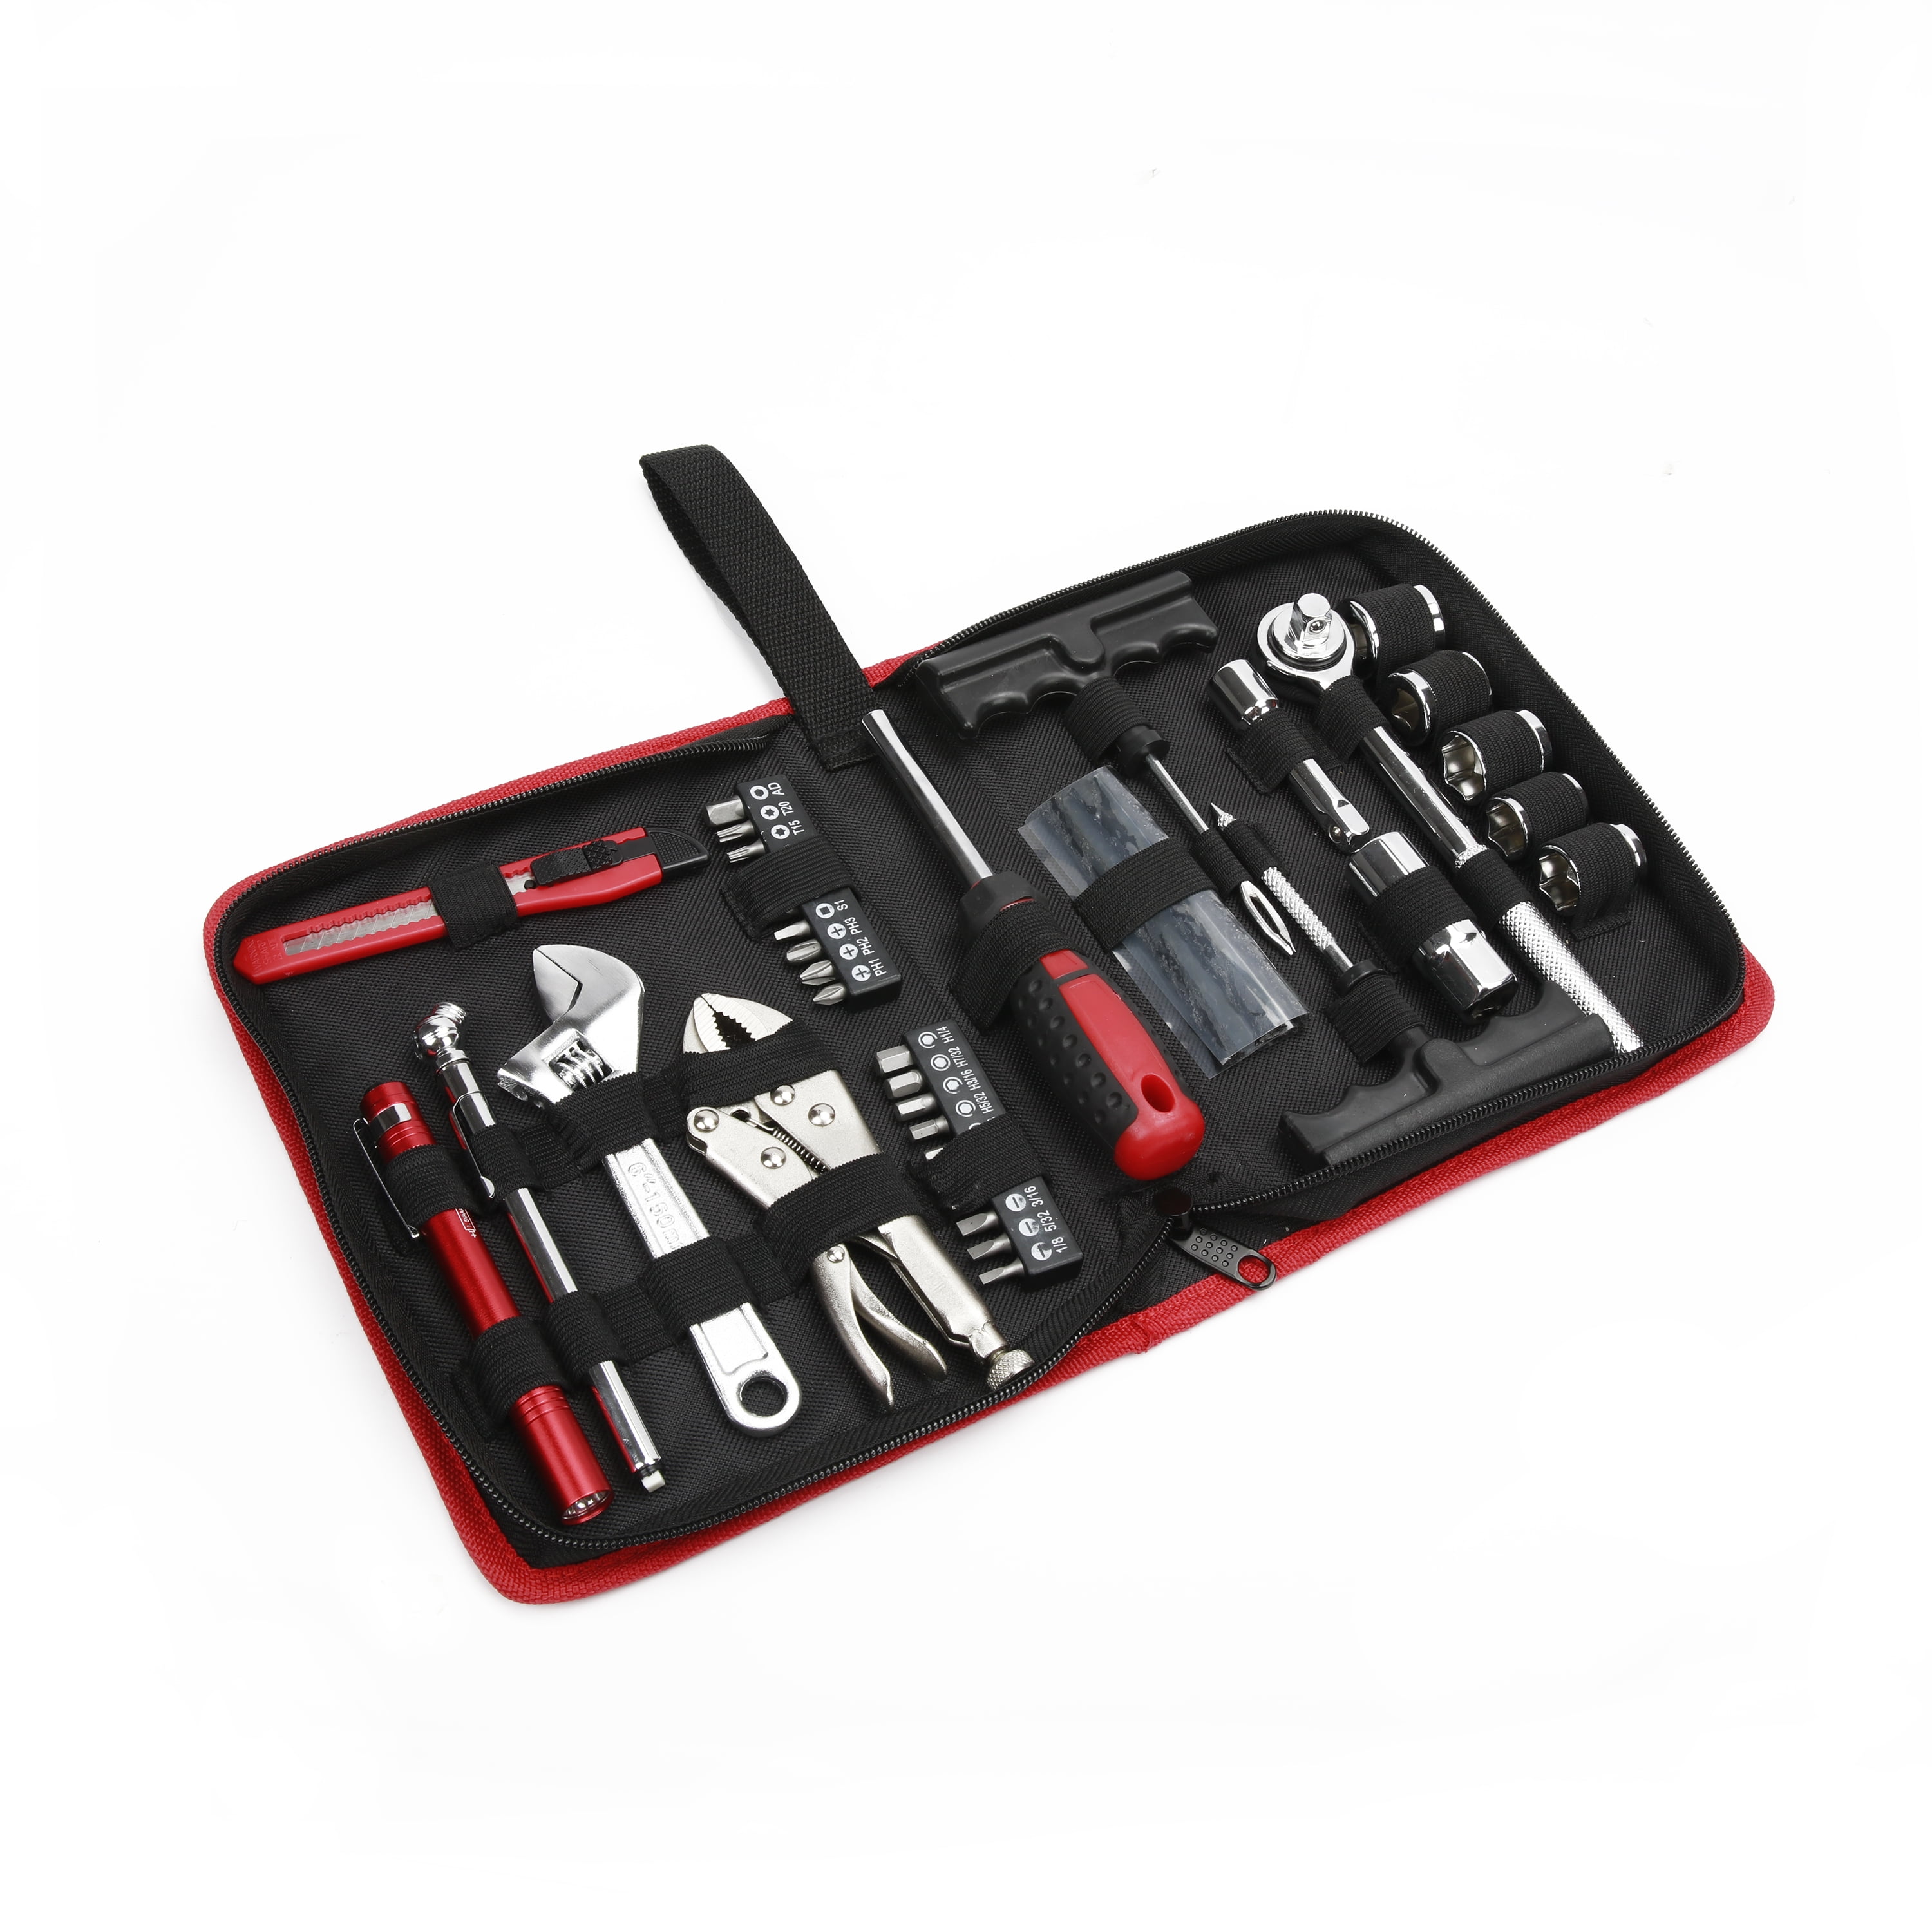 Hyper Tough Auto Repair Tool Kit with Easy Carry Bag, 42-Pieces